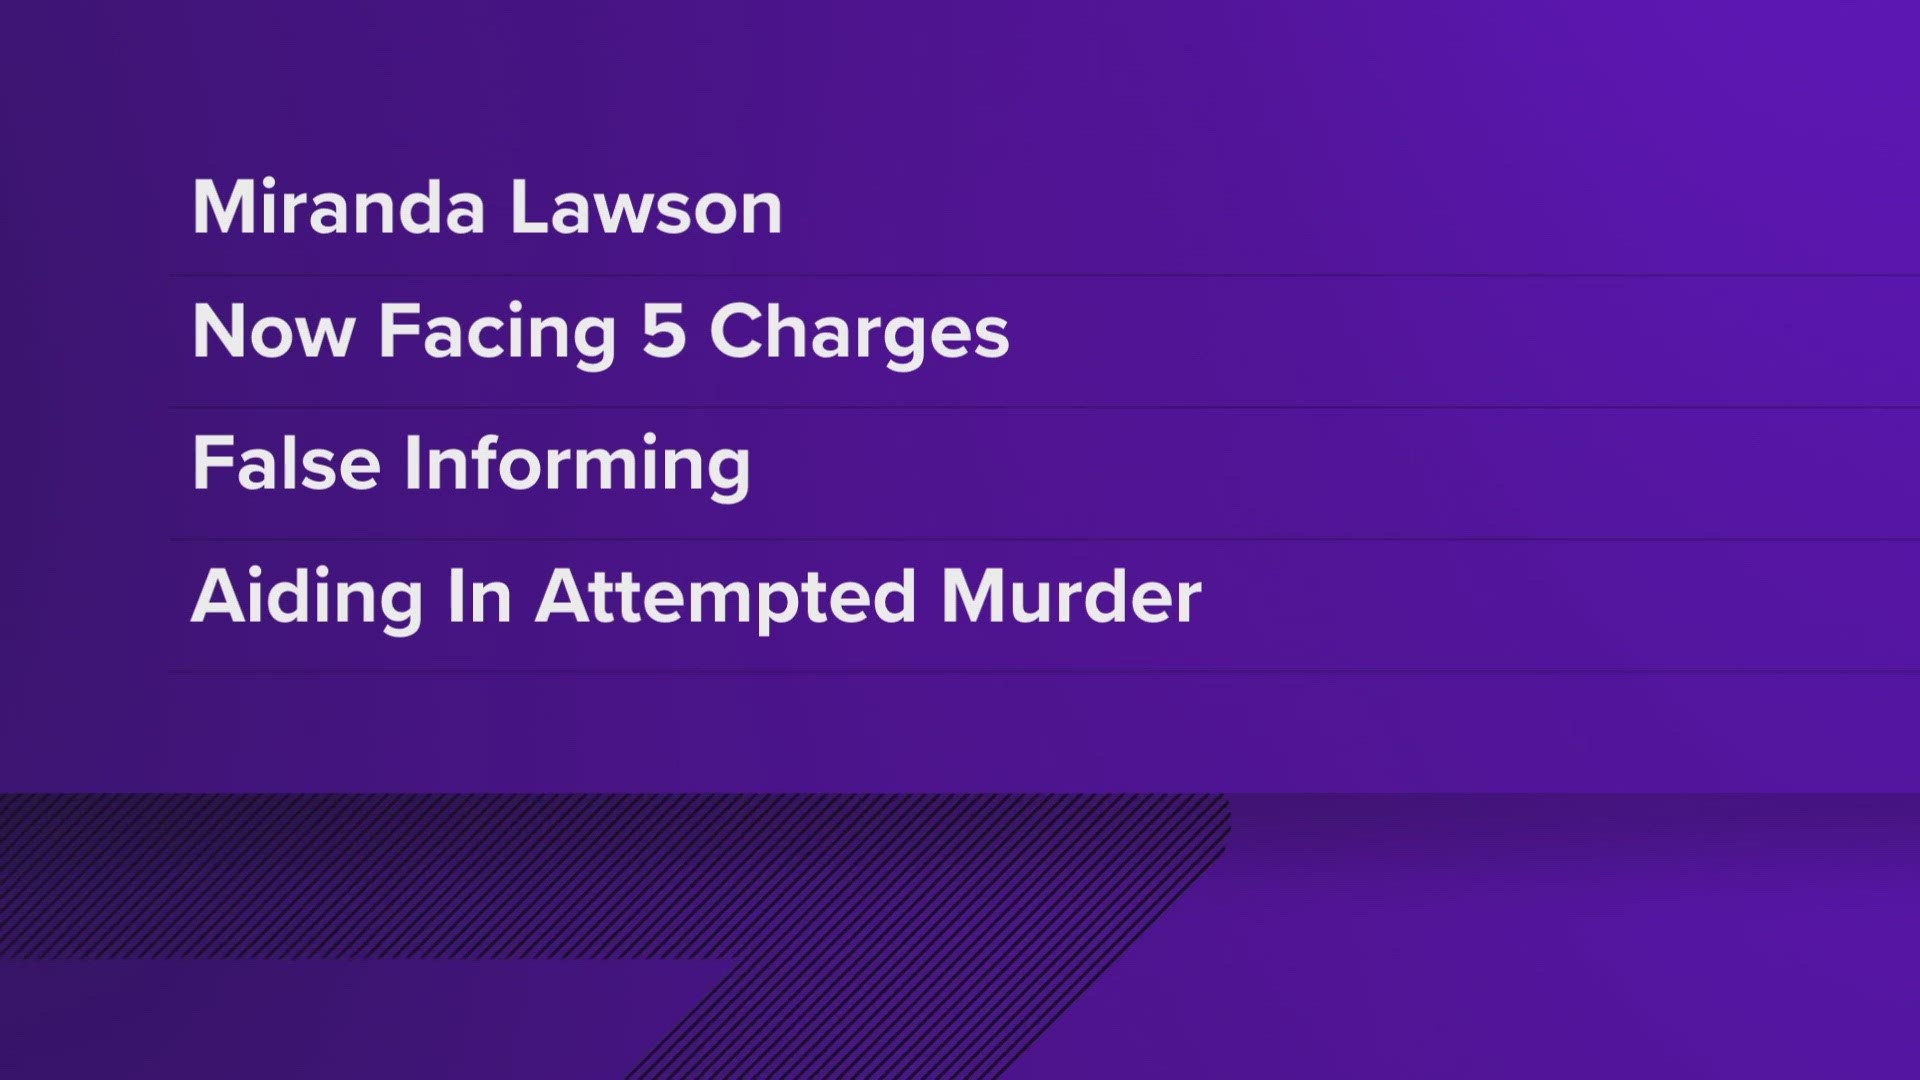 Miranda Lawson was originally charged with misdemeanor false informing of police. She is now facing felony charges.